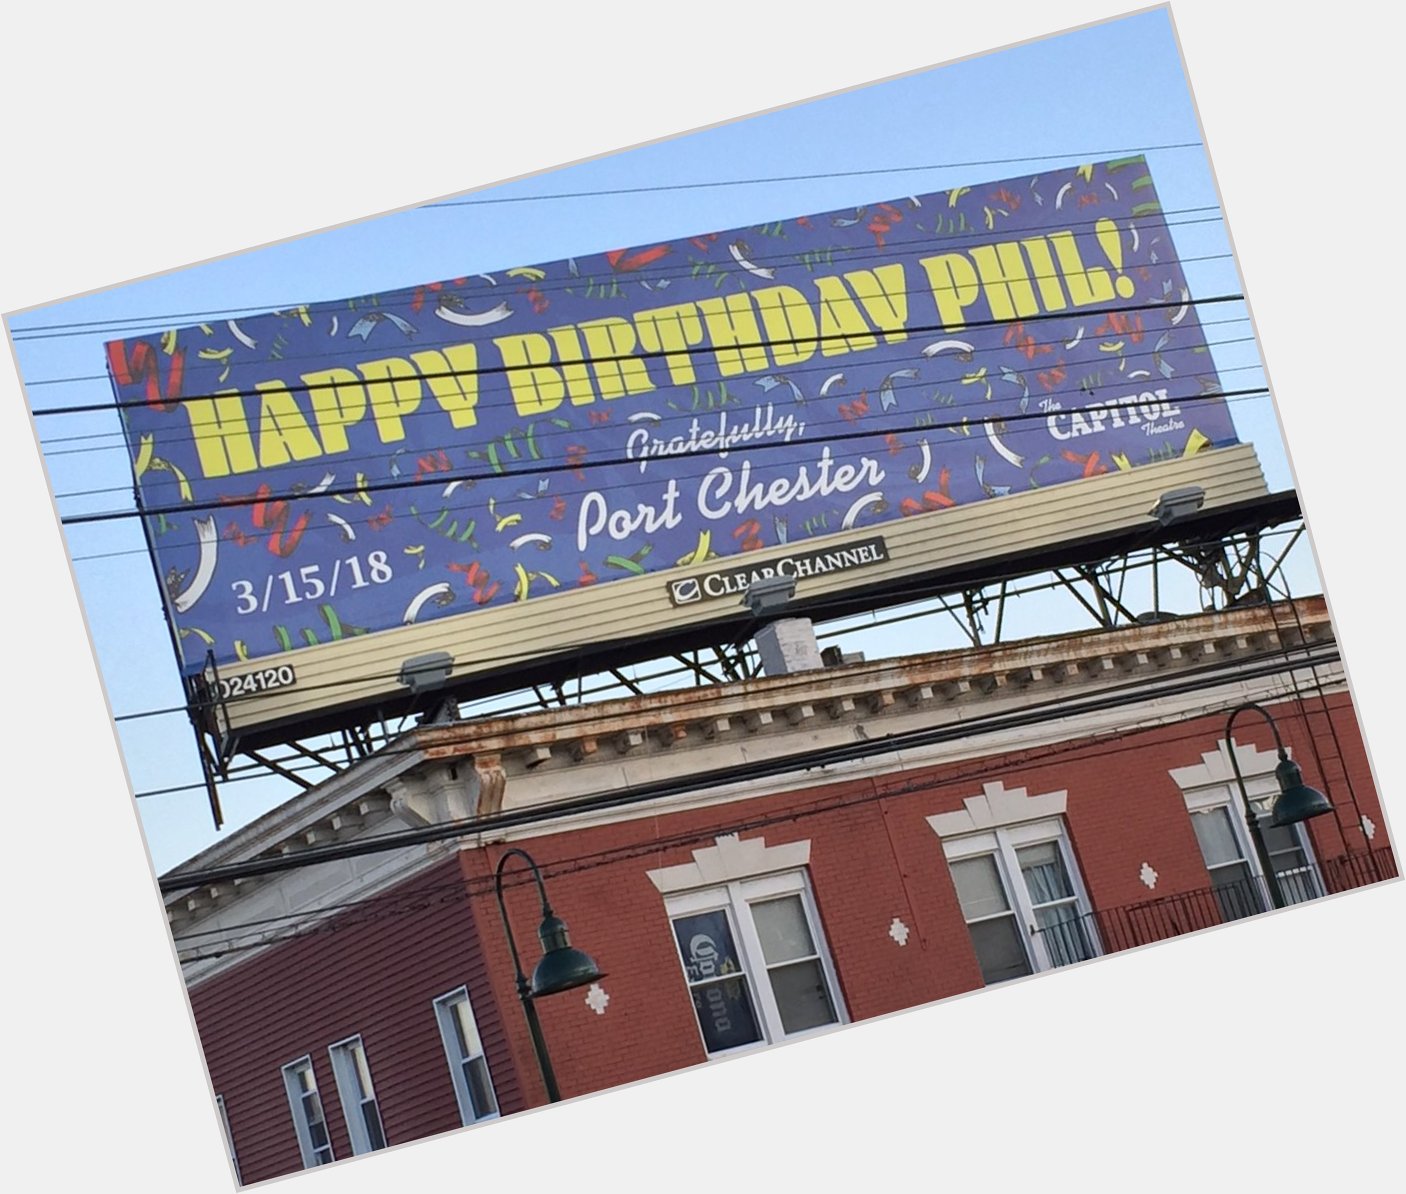 Wow, happy birthday Phil Lesh.  Nice sign in Port Chester. 